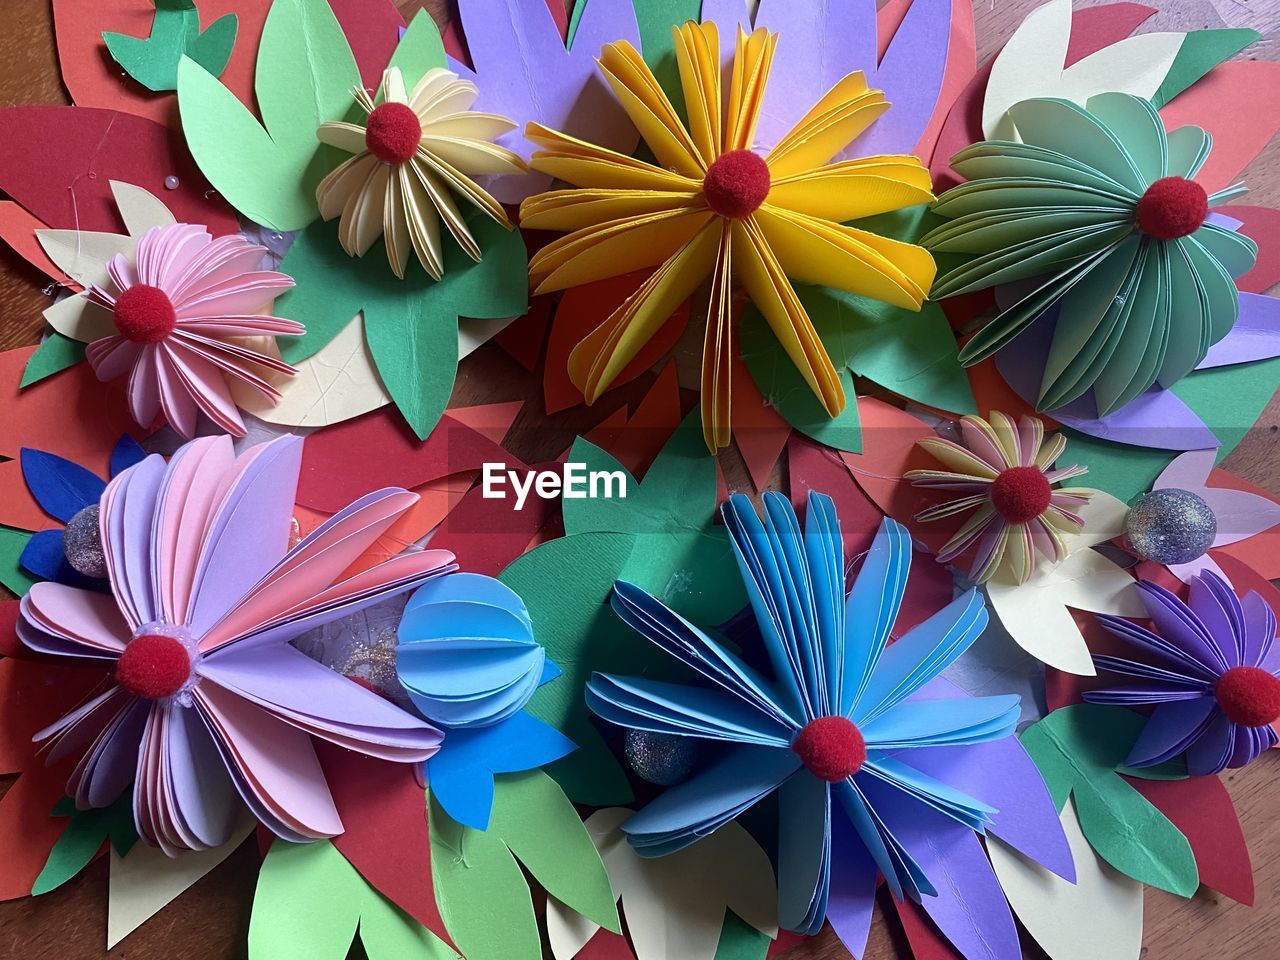 wheel, multi colored, flower, art, origami paper, petal, no people, large group of objects, pinwheel toy, close-up, creativity, paper, pattern, high angle view, variation, craft, origami, art paper, abundance, blue